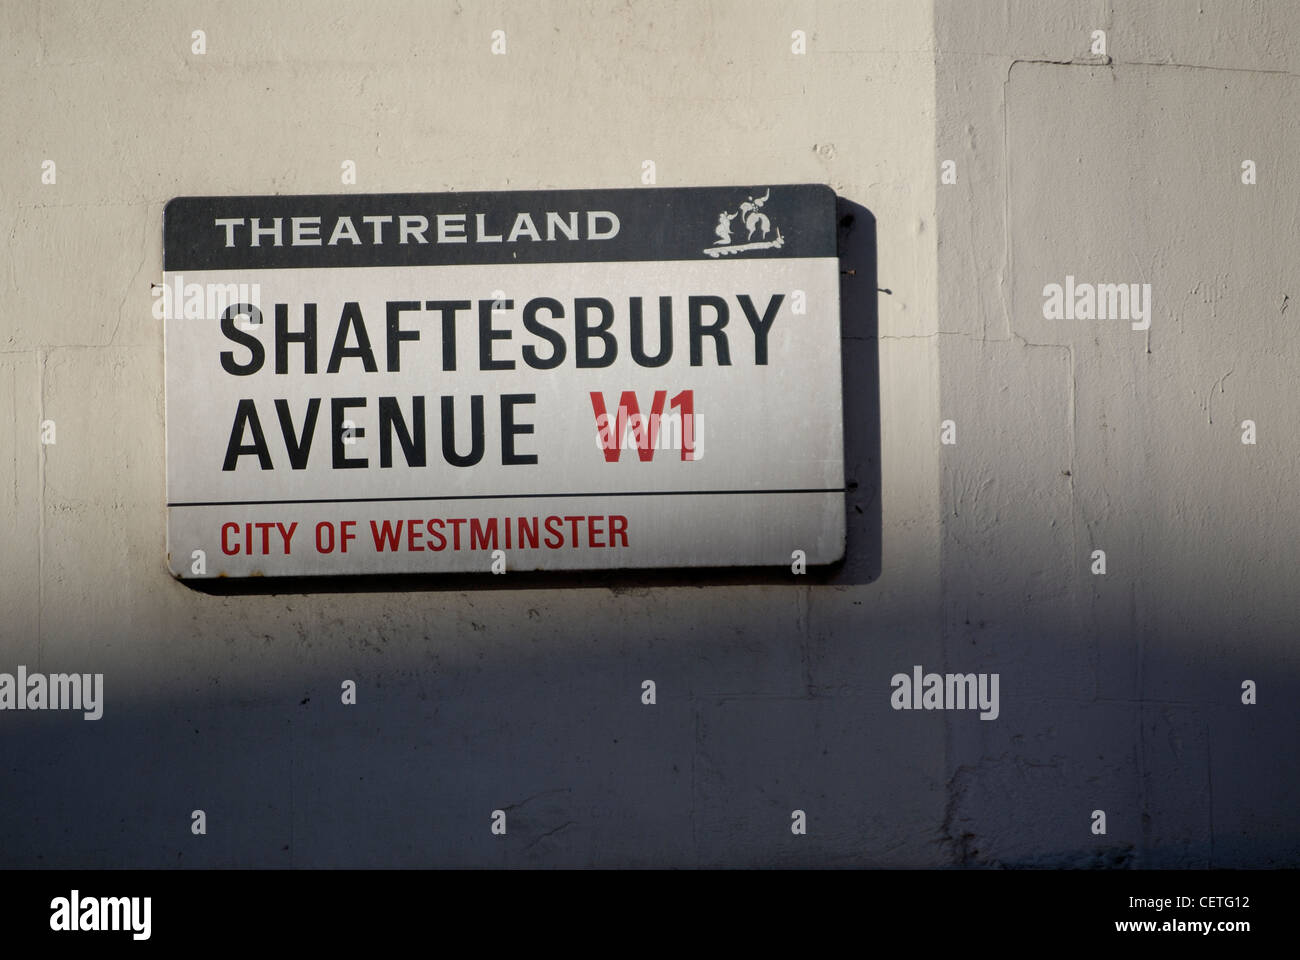 Shaftsbury Avenue street sign. Shaftsbury Avenue is named after Anthony Ashley Cooper, 7th Earl of Shaftesbury. Stock Photo